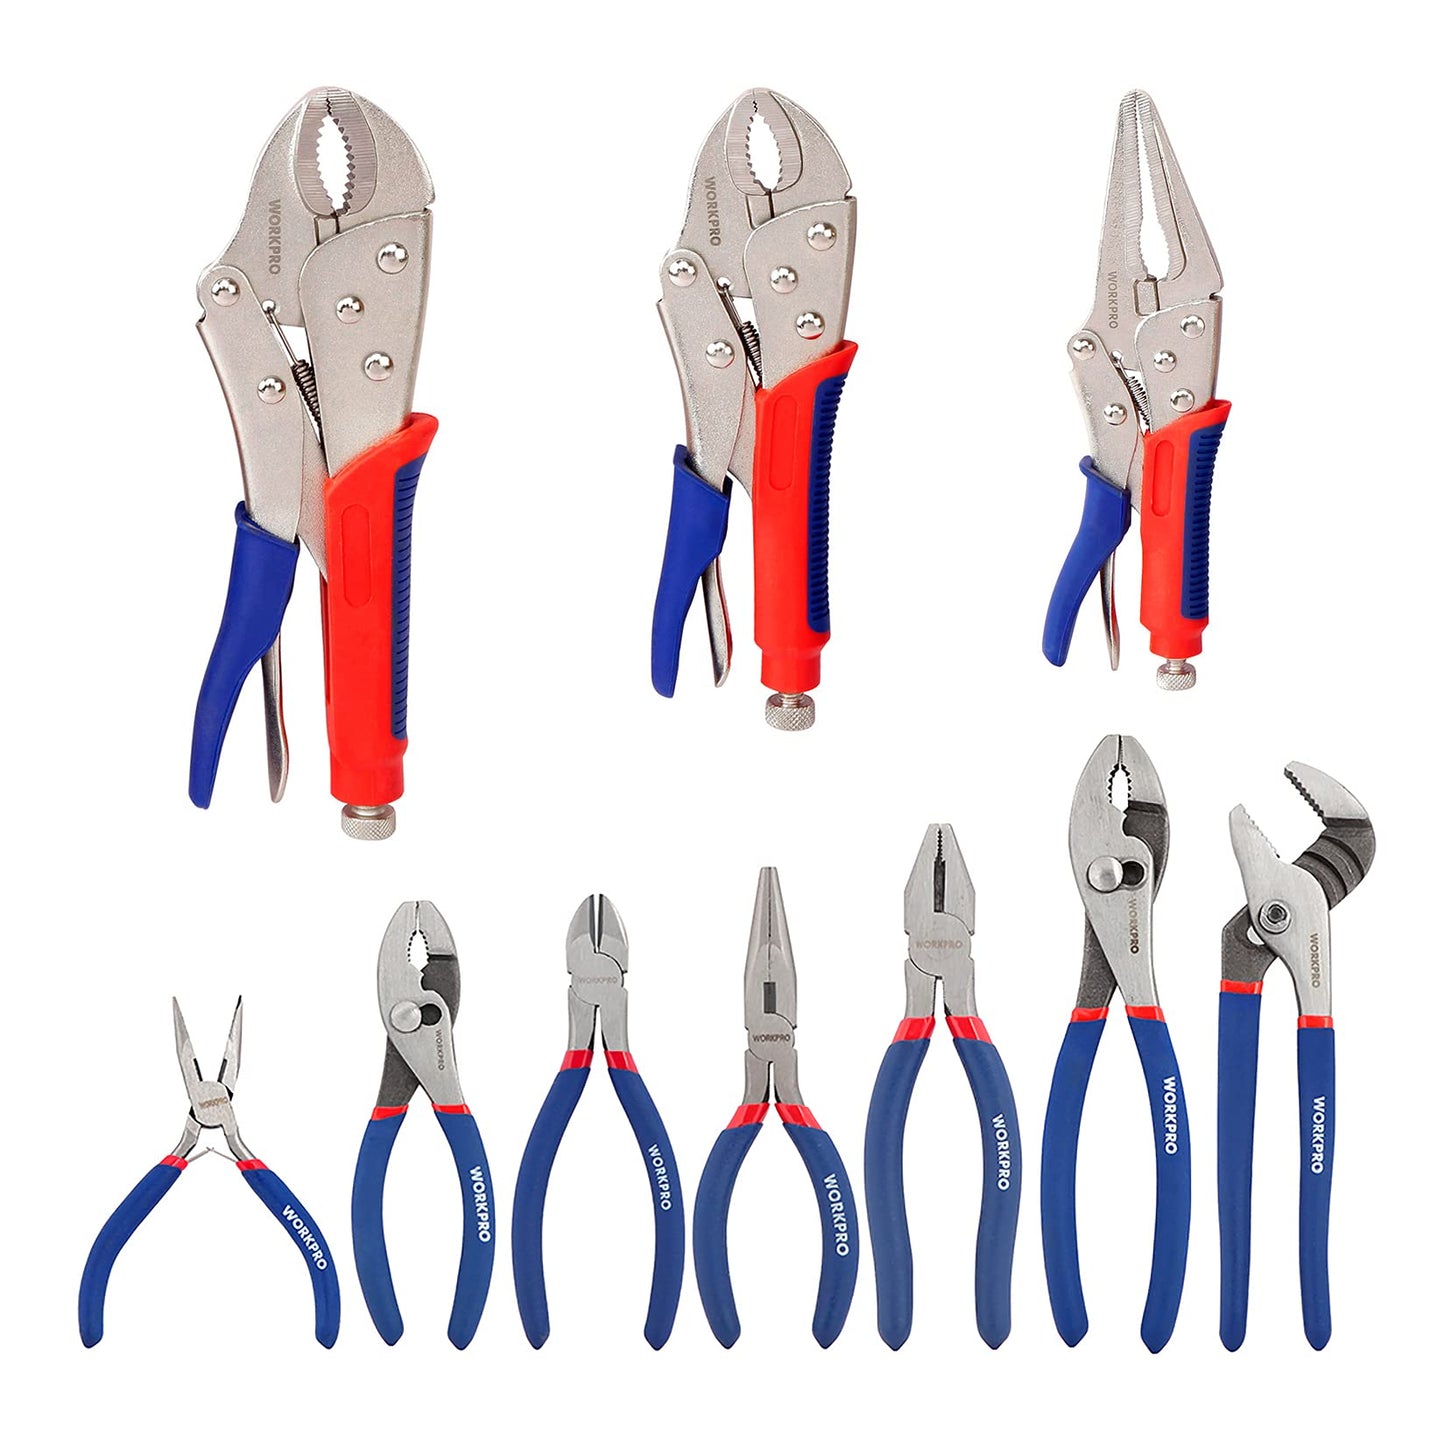 WORKPRO 7-piece Pliers Set and 3-piece Locking Pliers Set combo